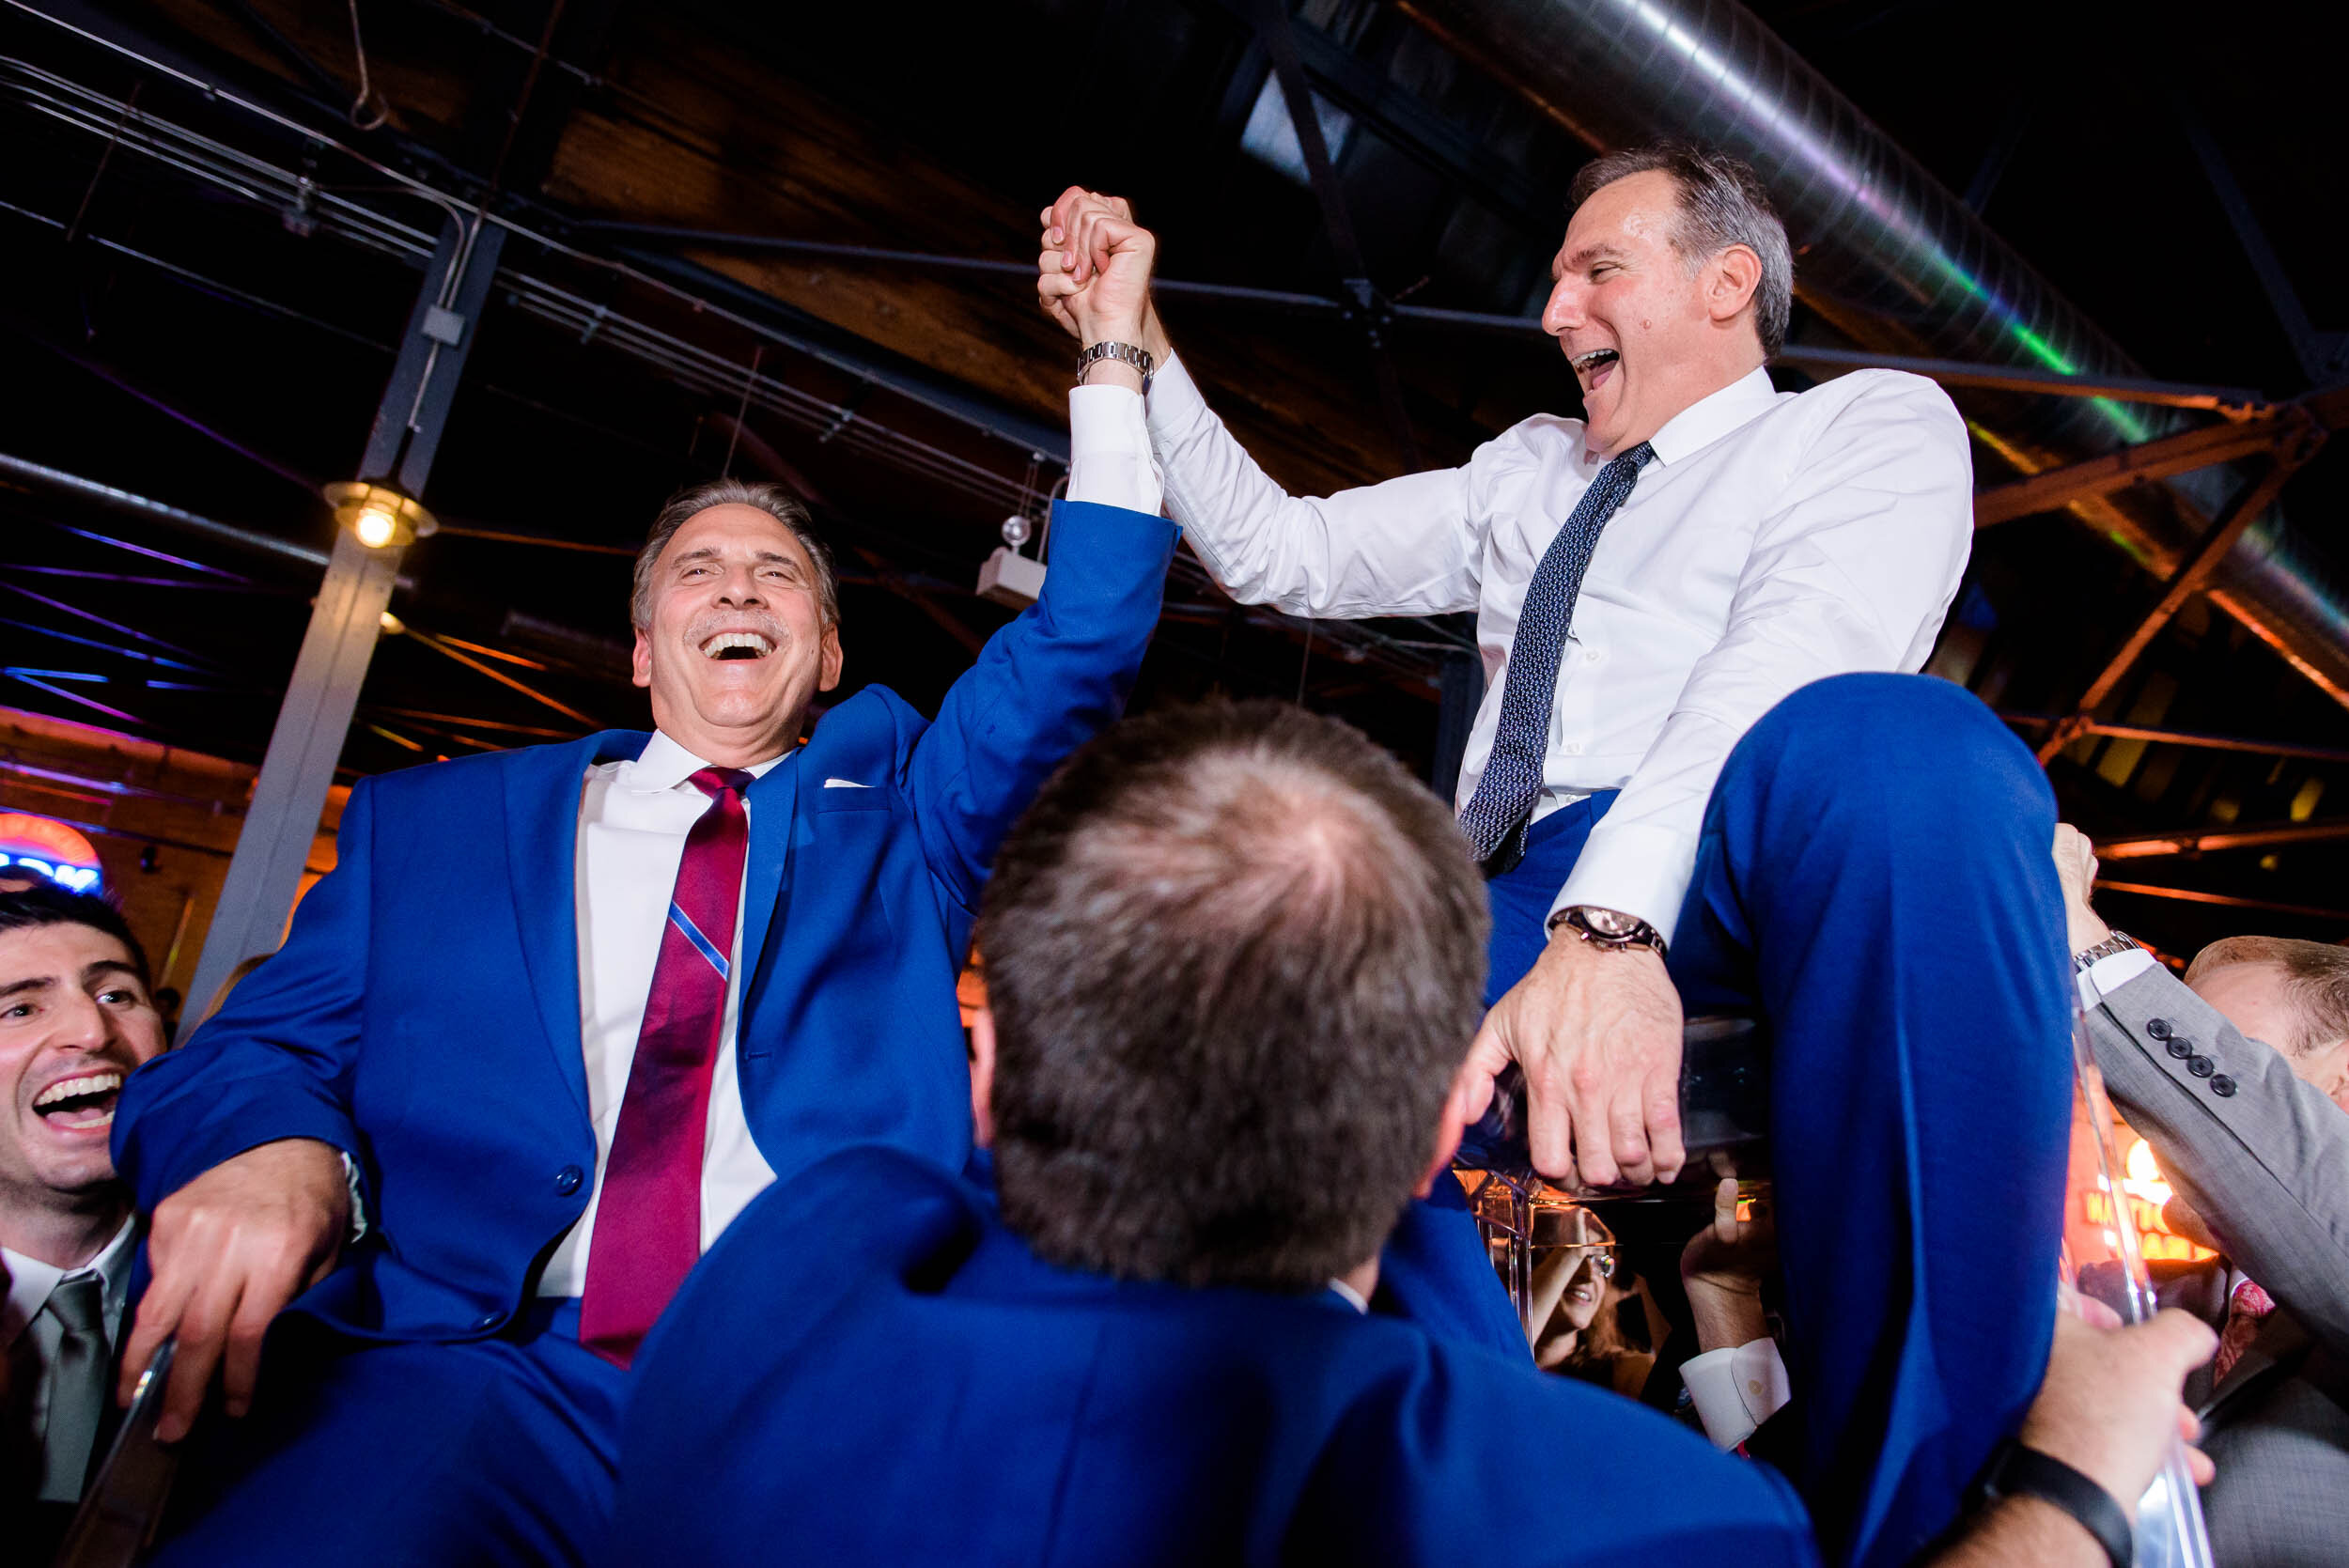 The dads are lifted during the horah: Ravenswood Event Center Chicago wedding captured by J. Brown Photography.  